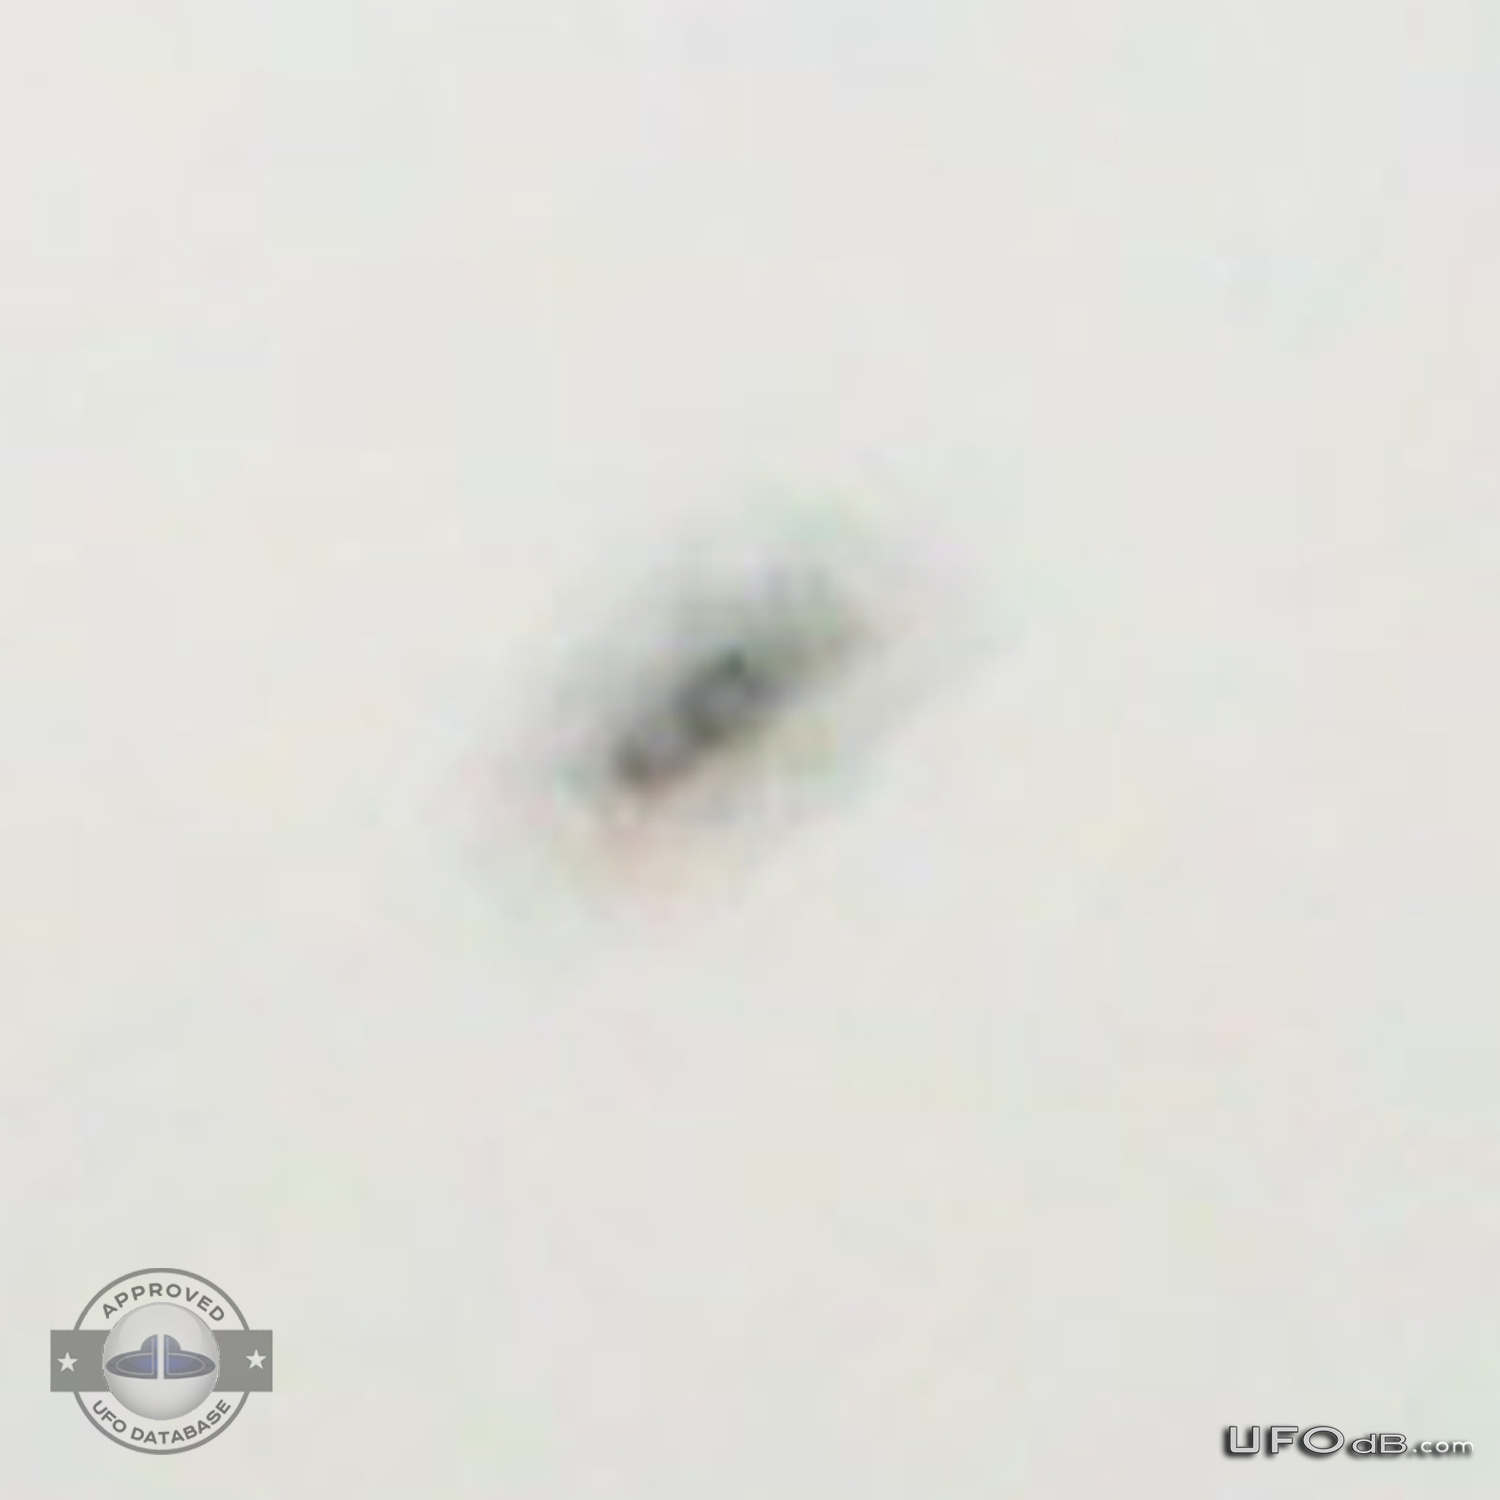 While looking at planes a Man see a UFO - Cauca, Colombia - March 2011 UFO Picture #280-5